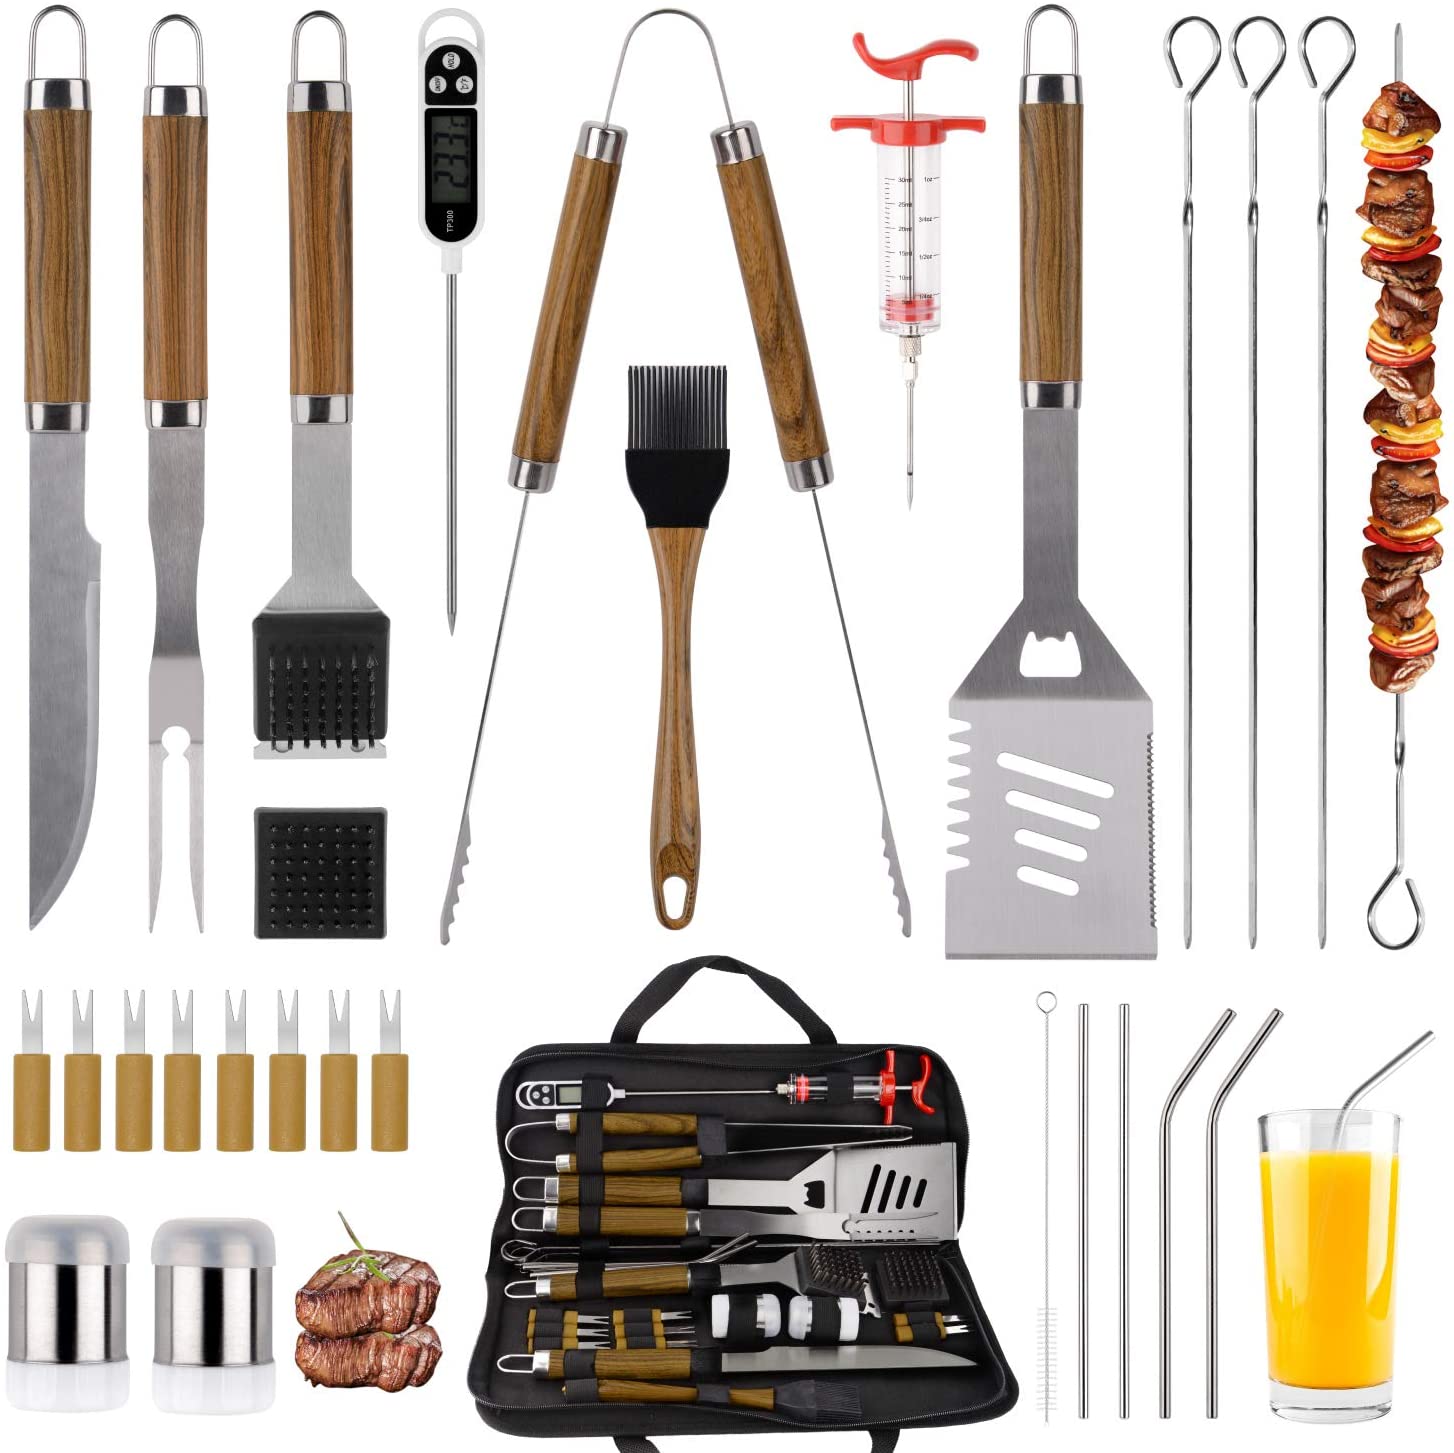 SixSun 30PCS BBQ Grill Tools Set Wooden Handle Stainless Steel Grilling Accessories with Spatula, Tongs, Skewers for Barbecue, Camping, Kitchen, Complete Premium Grill Utensils Set - Brown - image 1 of 3